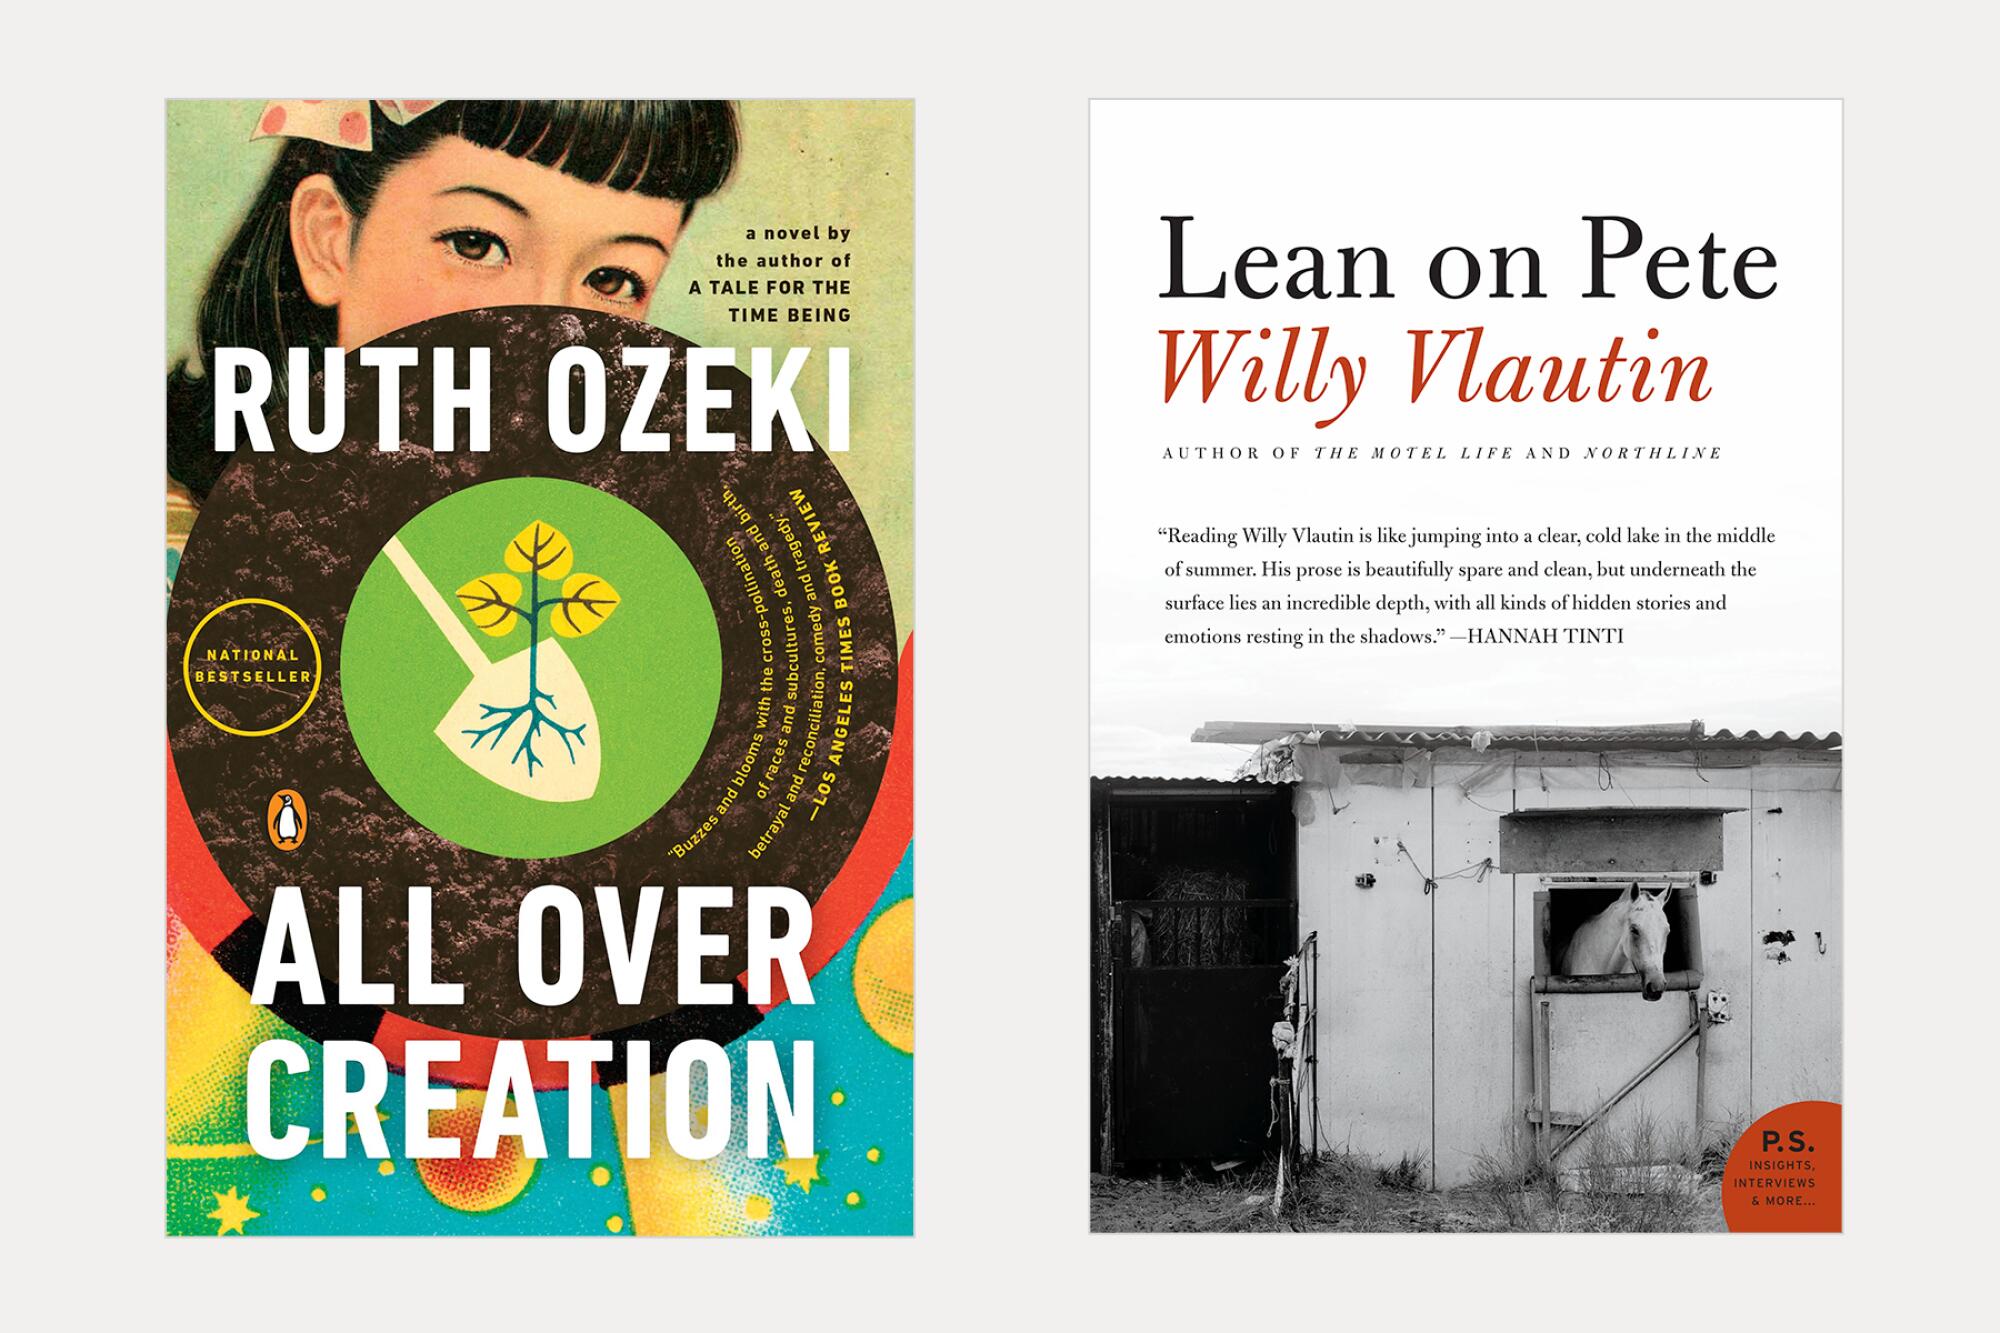 book covers: All Over Creation by Ruth Ozeki, and Lean on Pete by Willy Vlautin